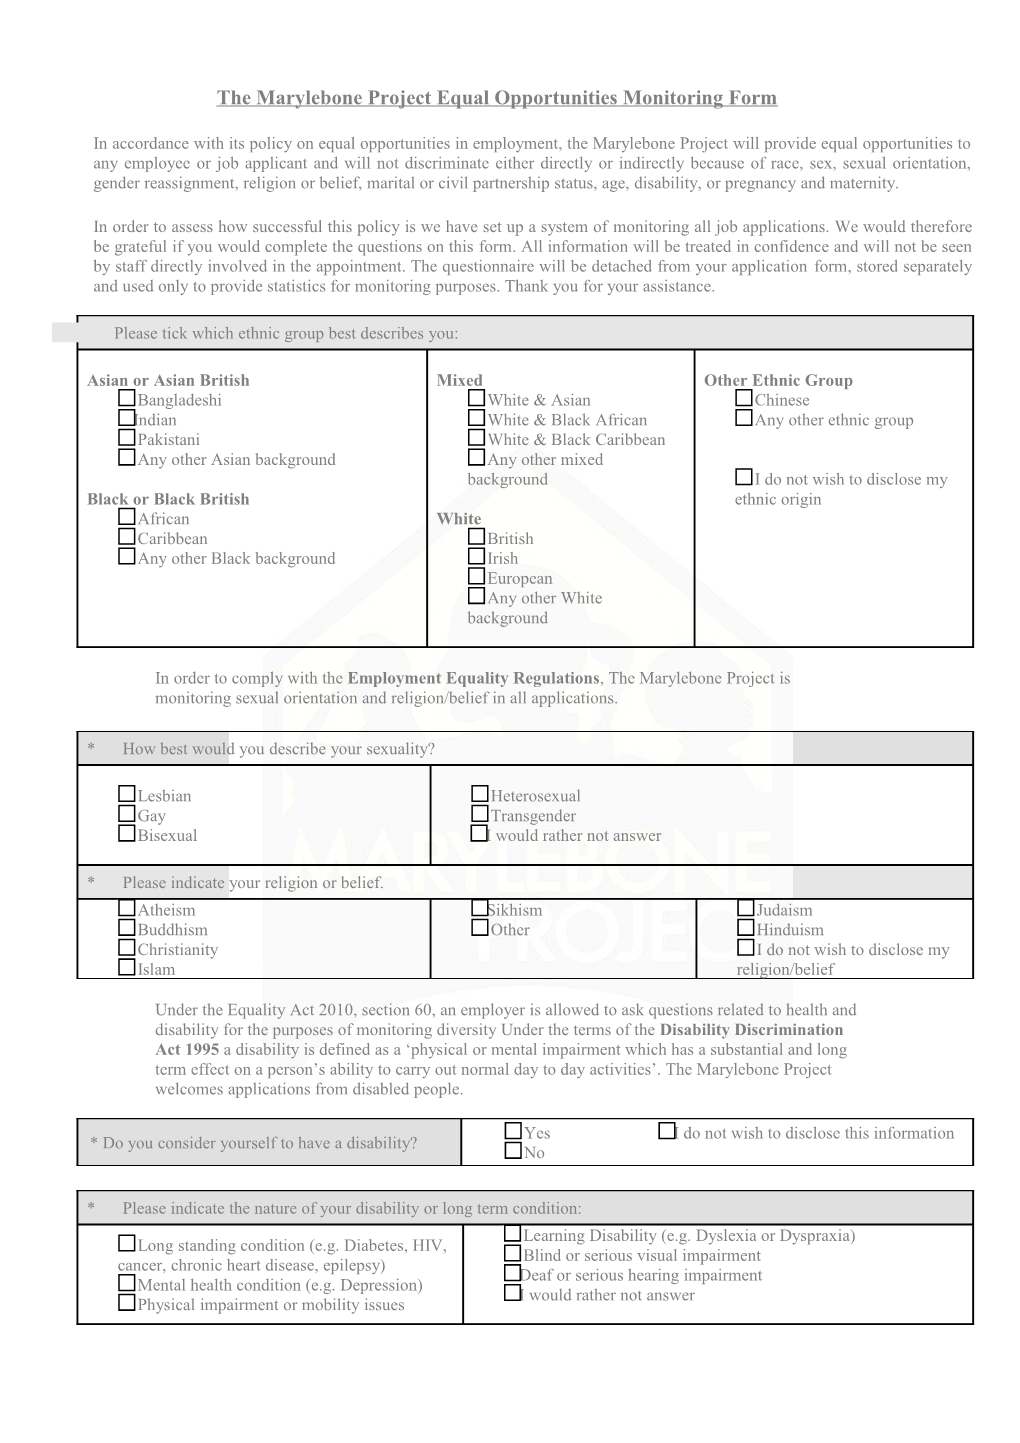 The Marylebone Project Equal Opportunities Monitoring Form